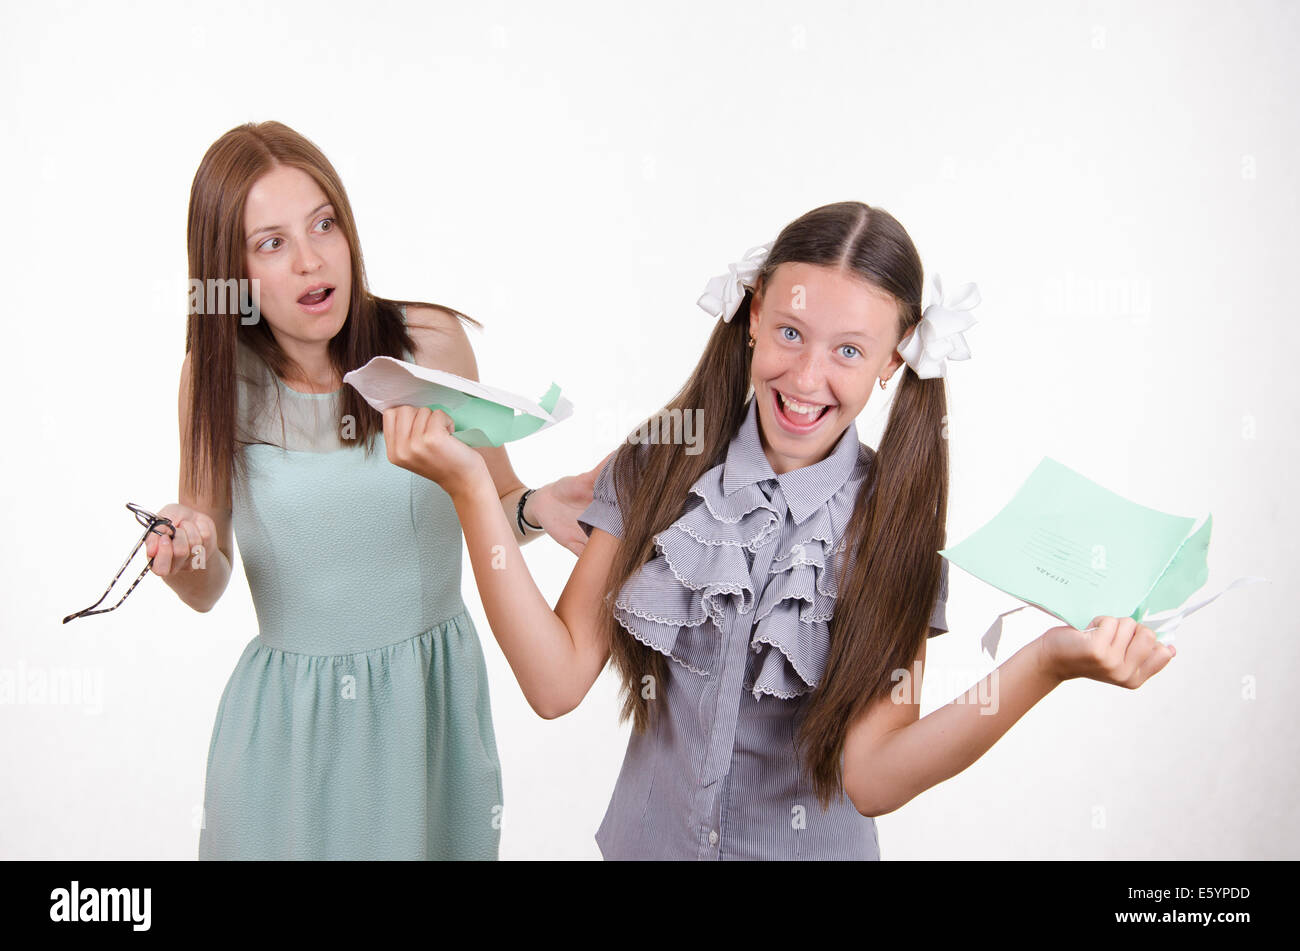 Schoolgirl having fun tearing the notebook in front of an angry teacher Stock Photo